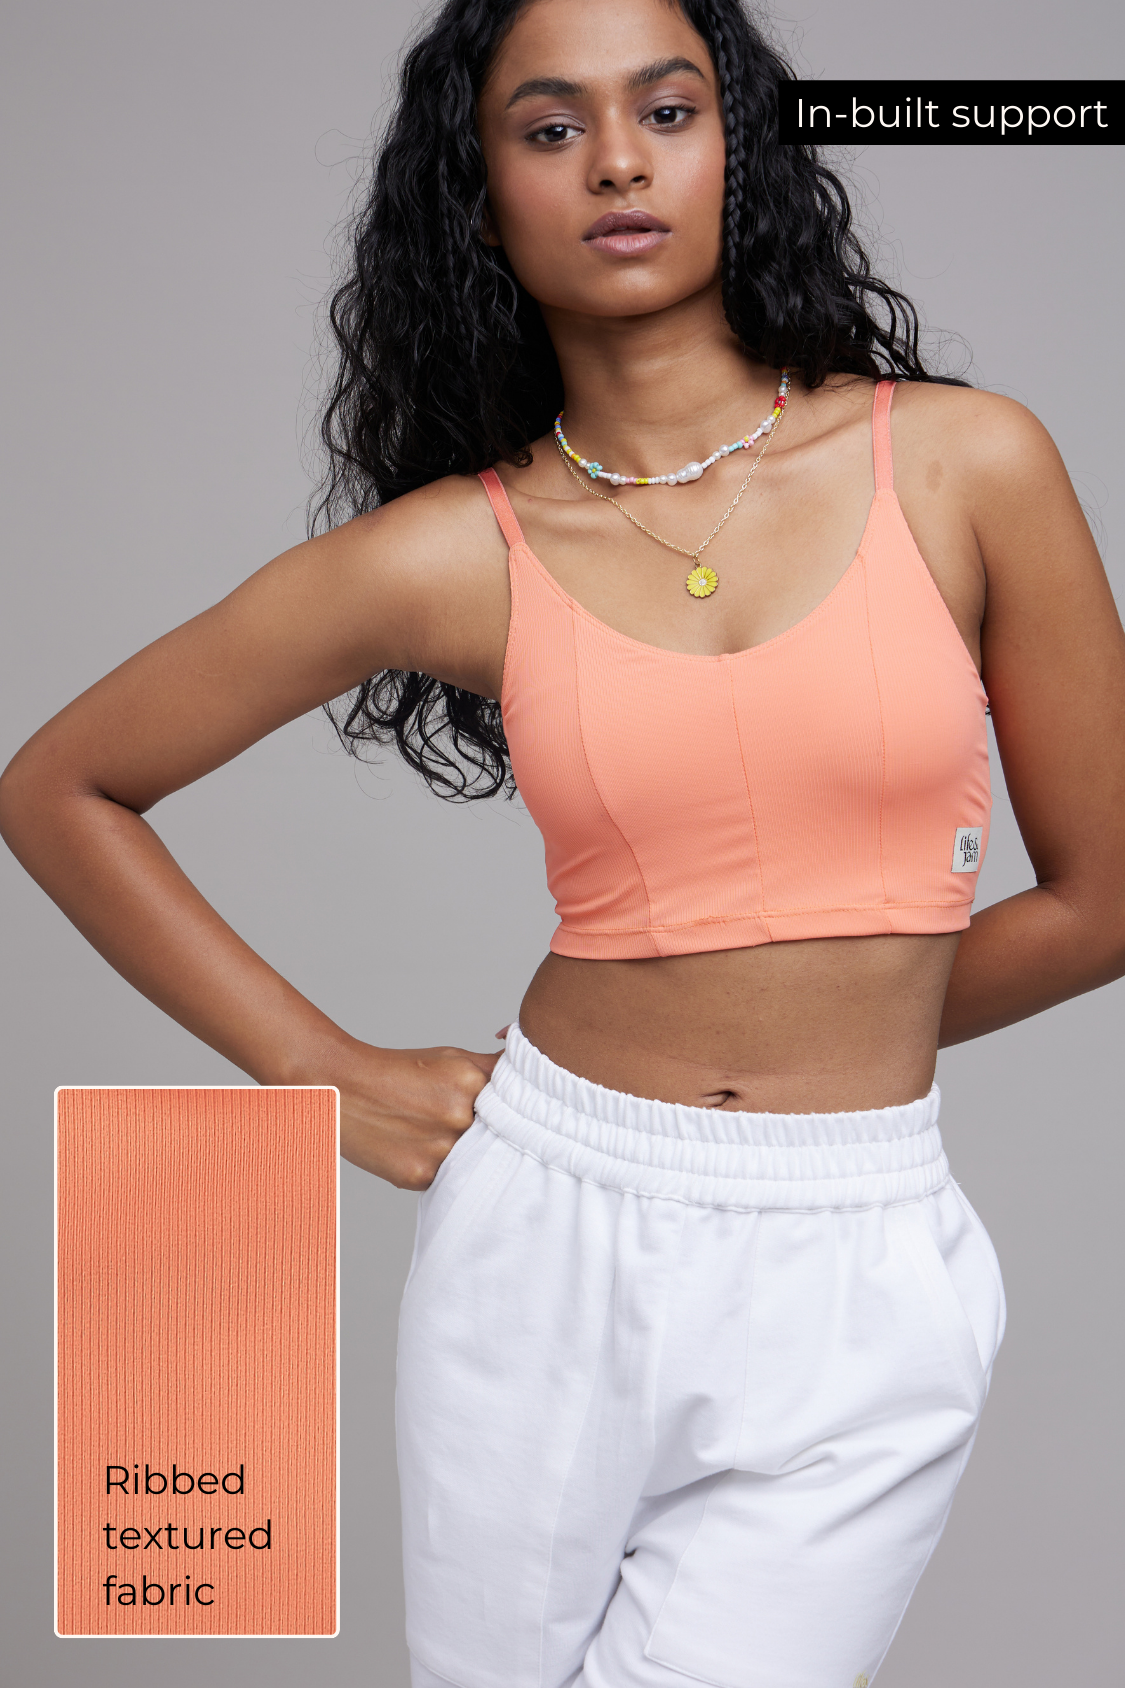 Buy Comfy Ribbed Long Sports Bra Top in Peach Online - Life & Jam